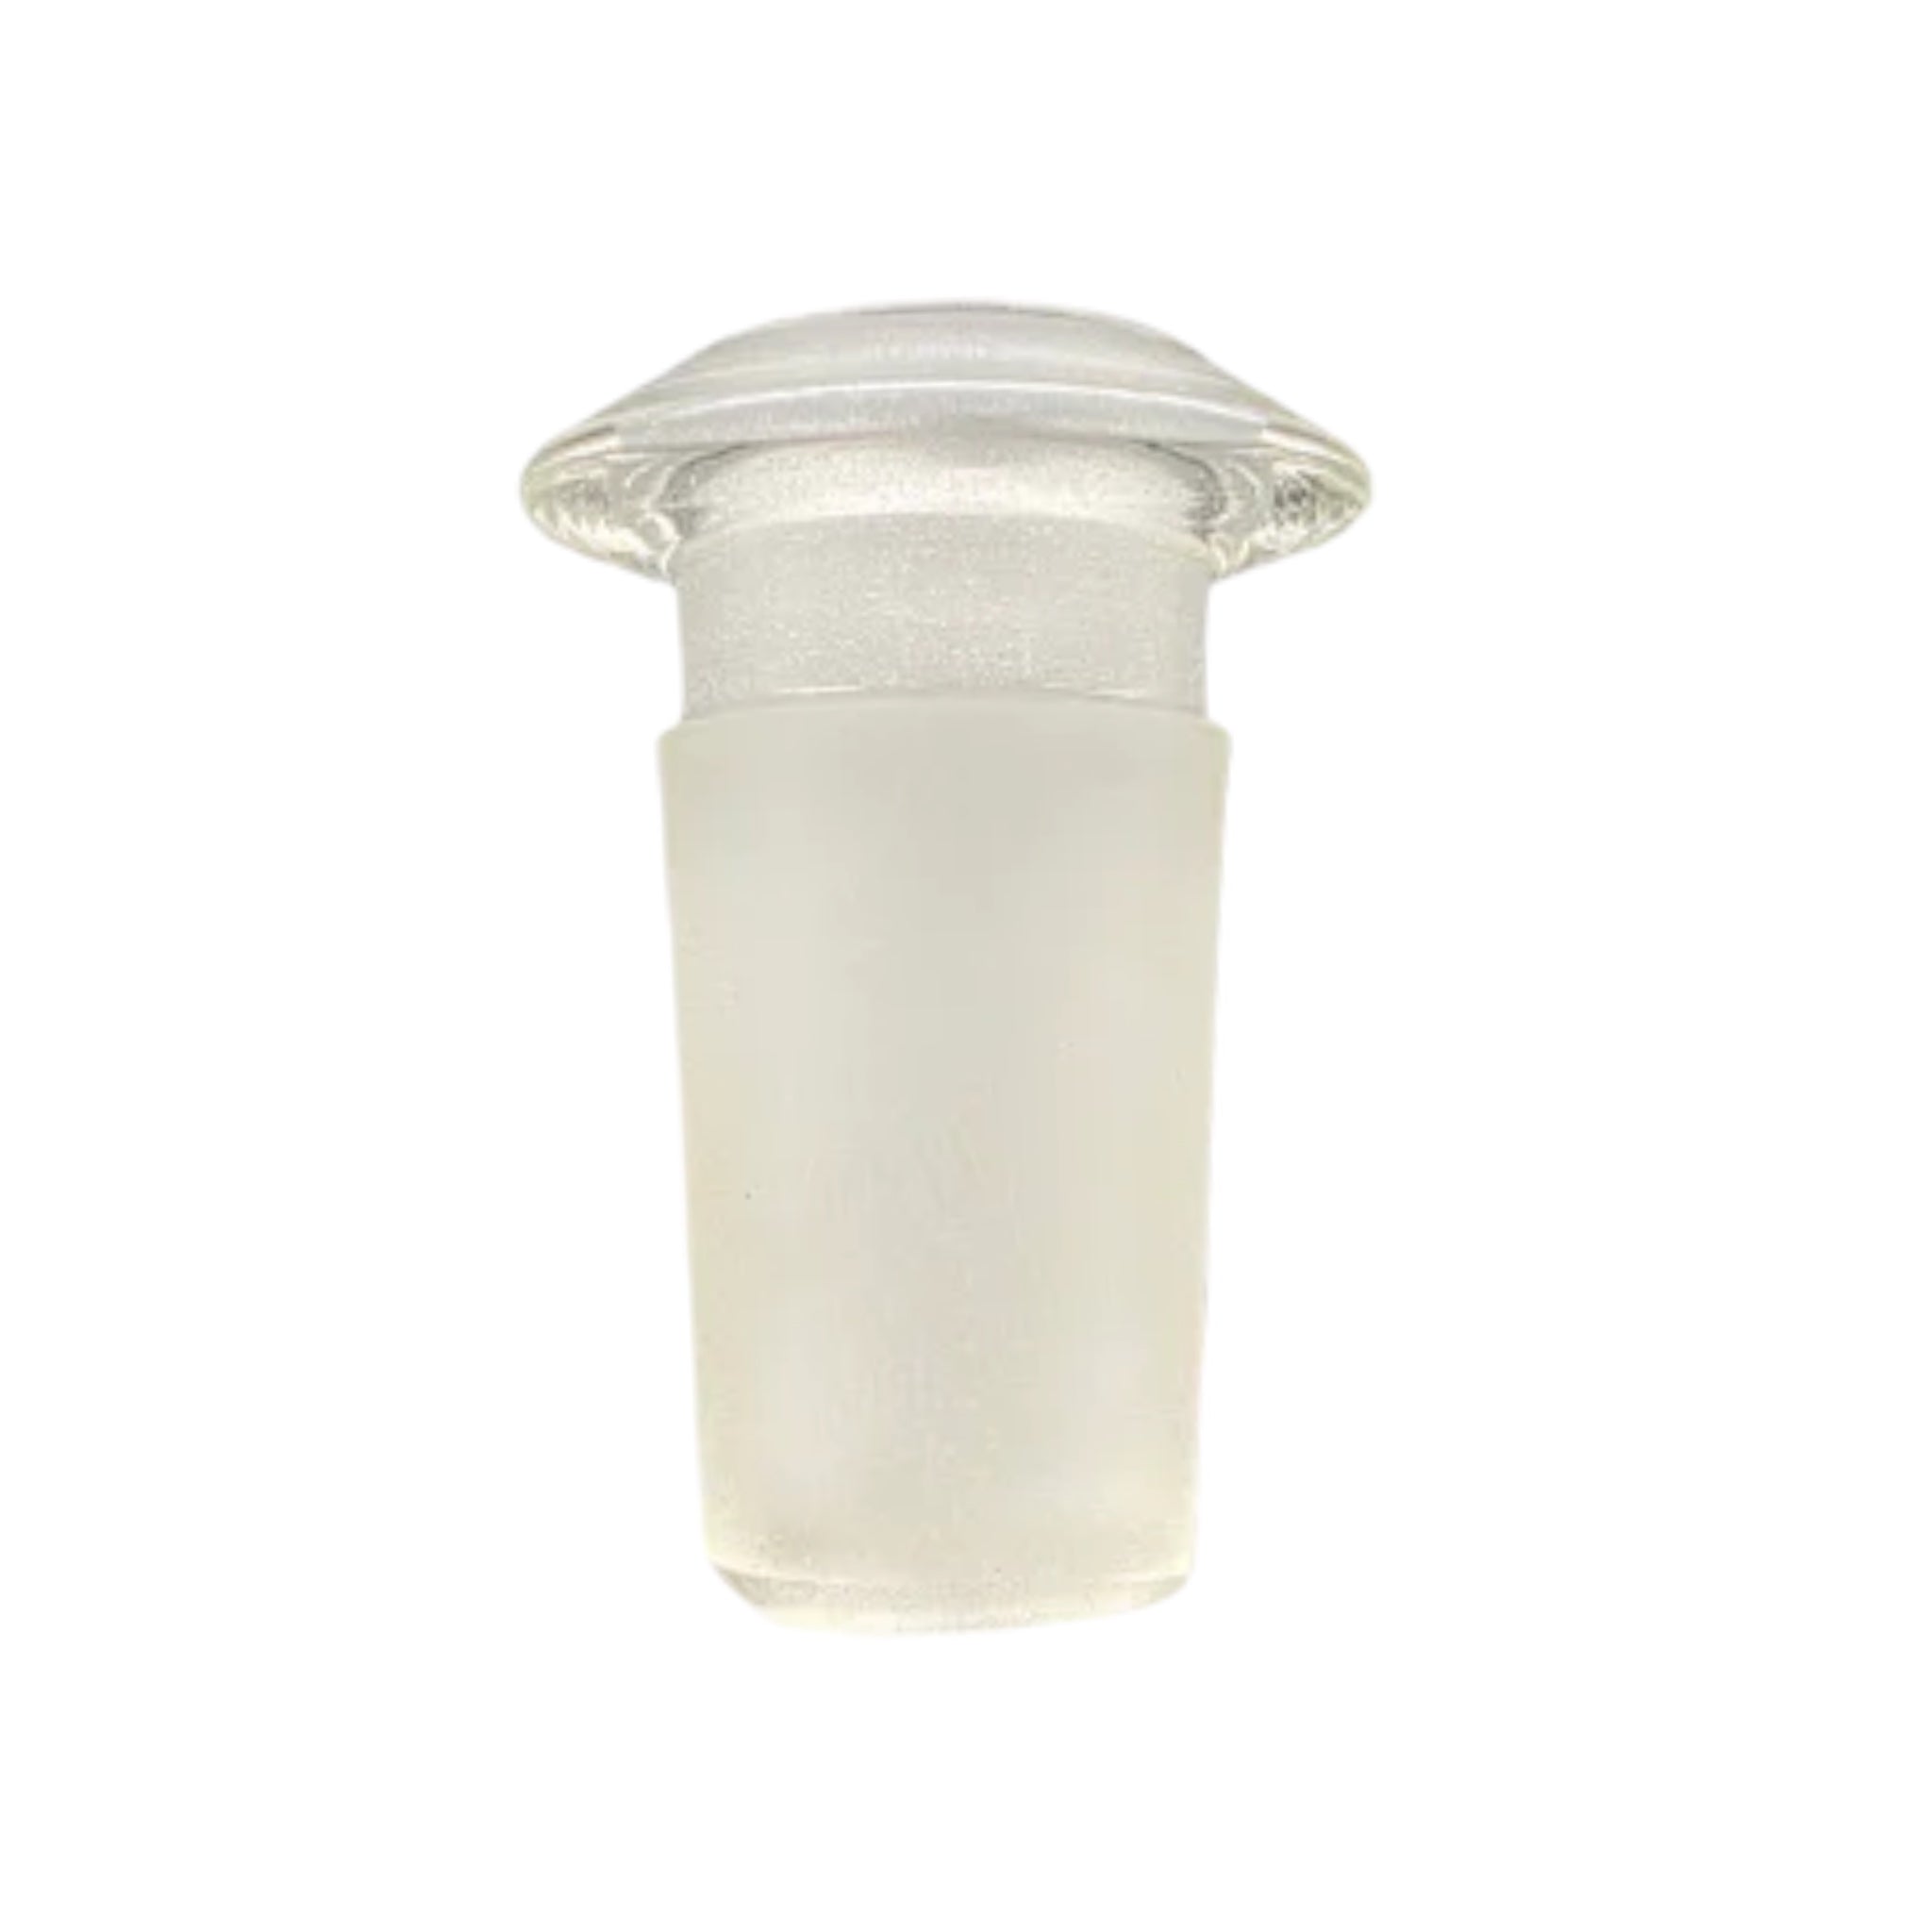 Glass Adapter For Bongs And Dab Rigs - 18MM Male To 14MM Female